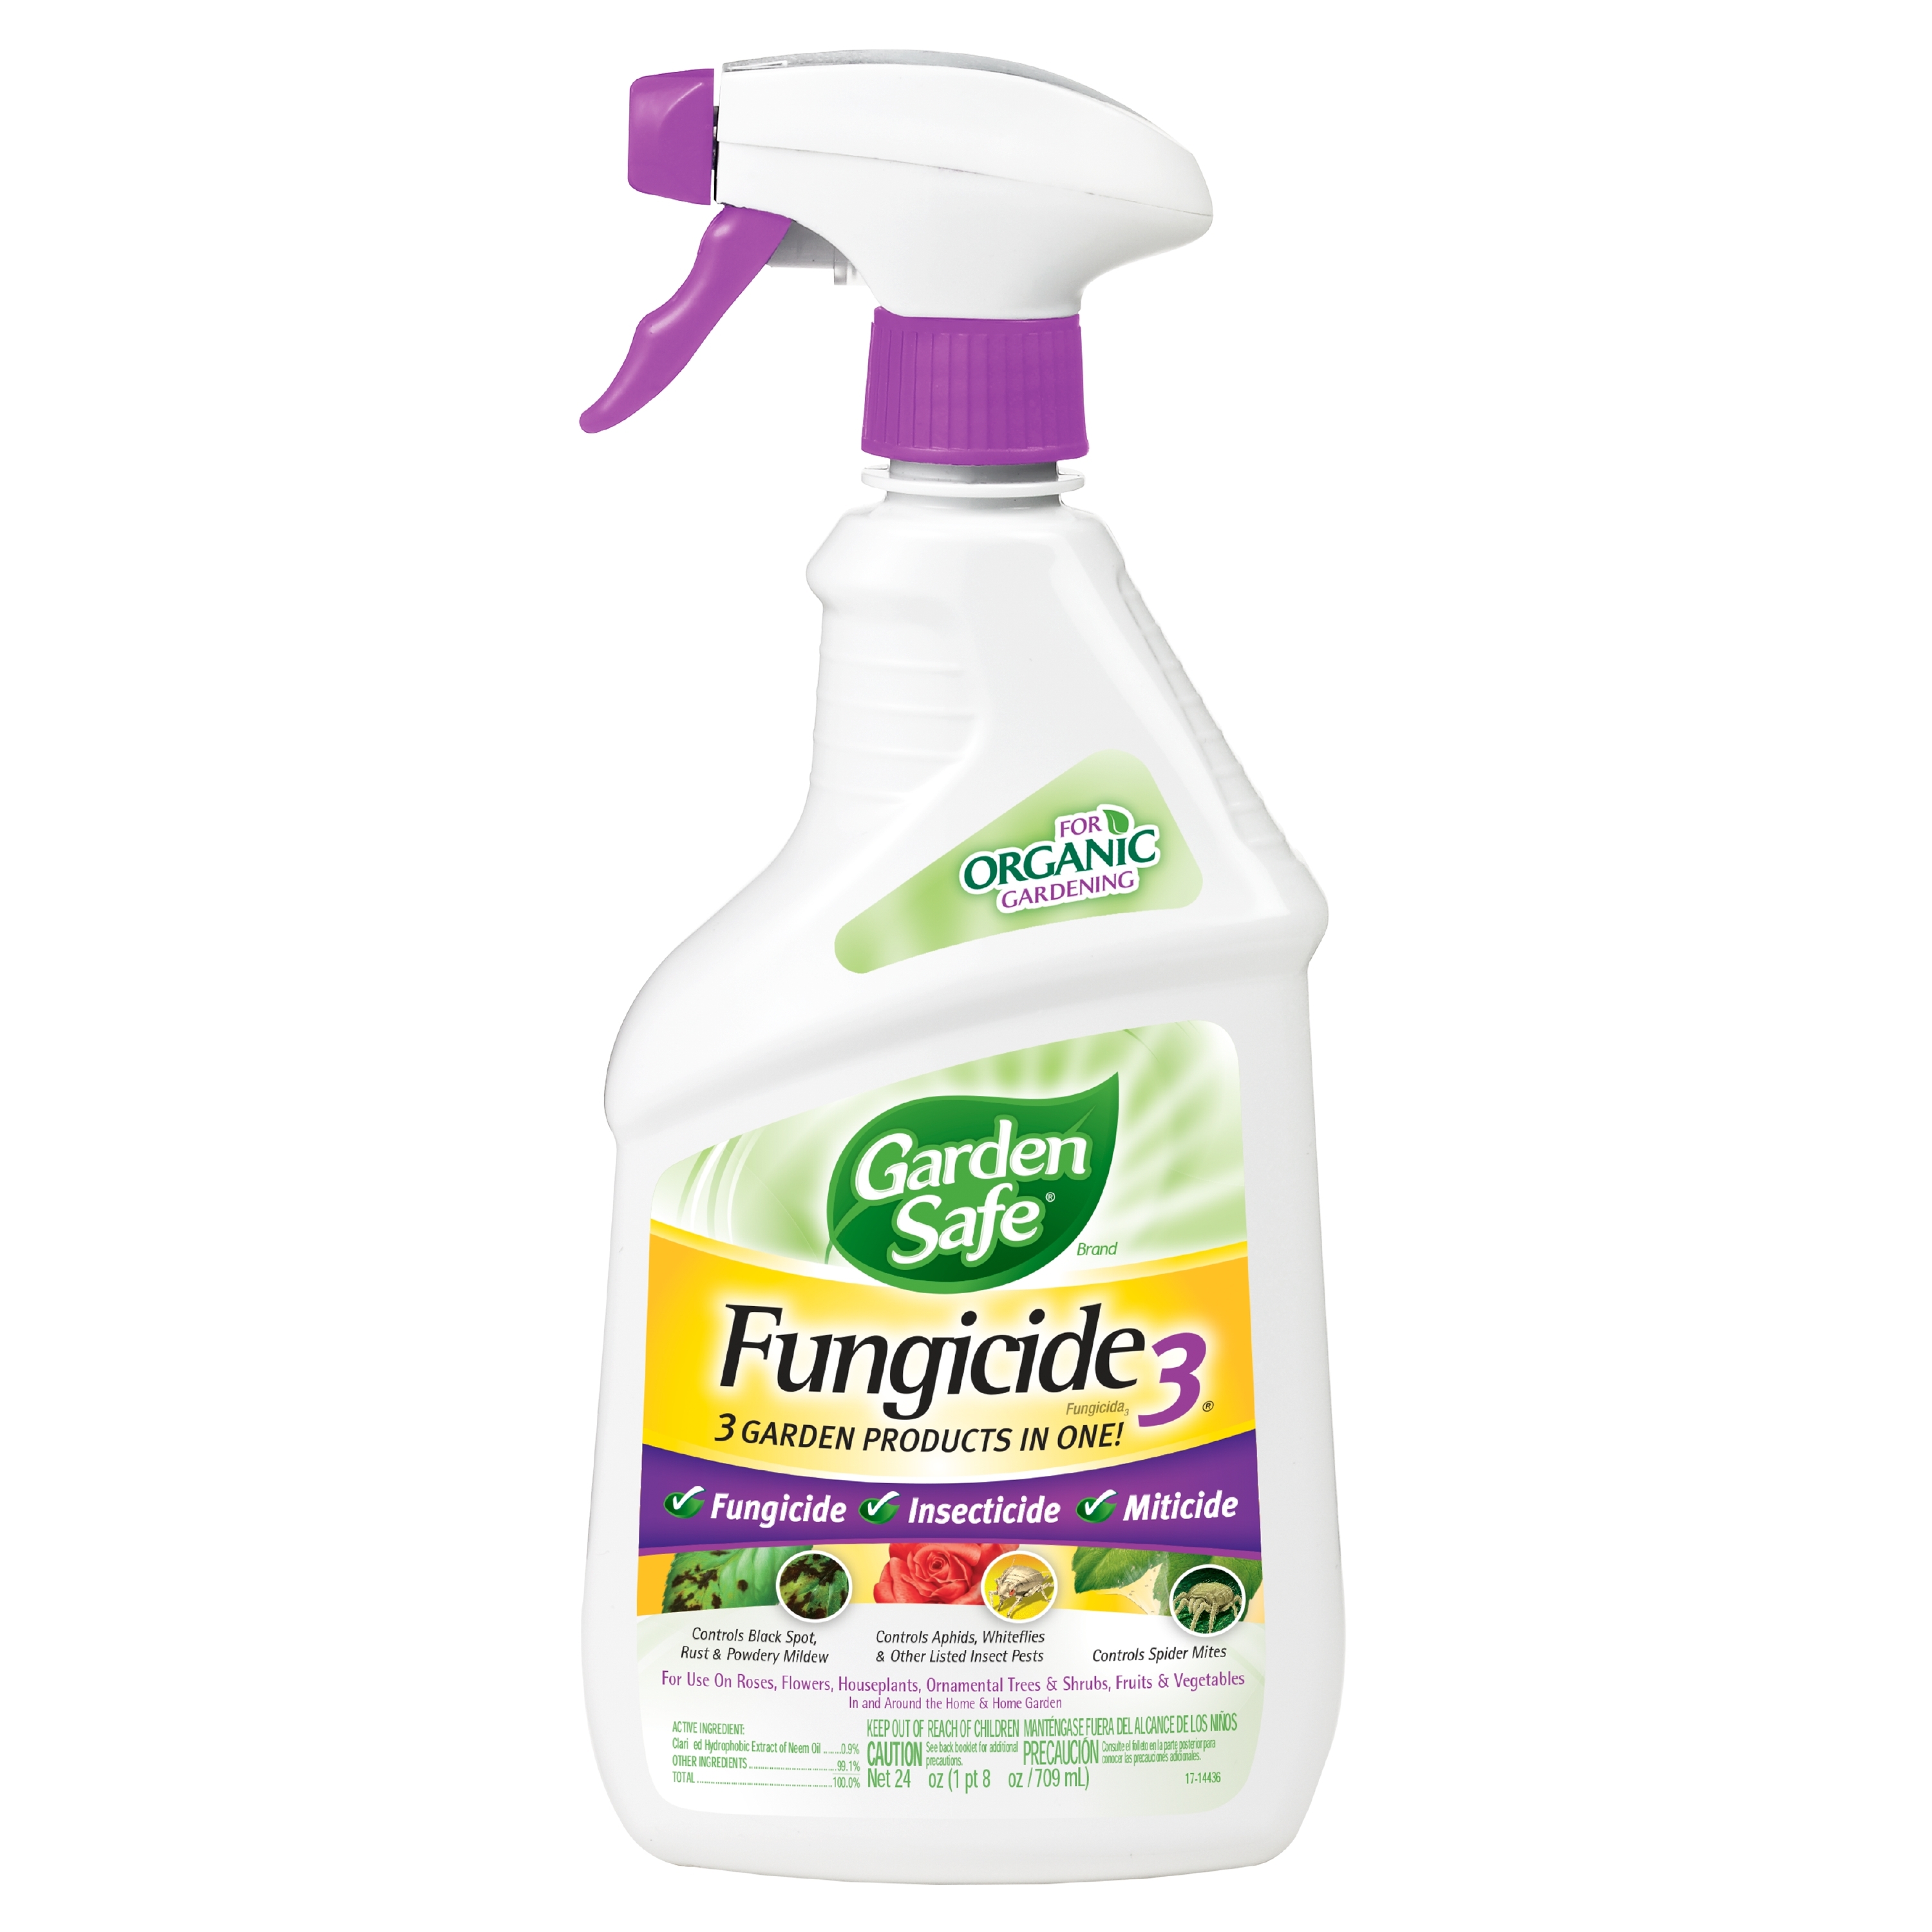 Garden Safe Brand Fungicide3 24 Ounces, 3 Garden Products in 1 - image 1 of 5